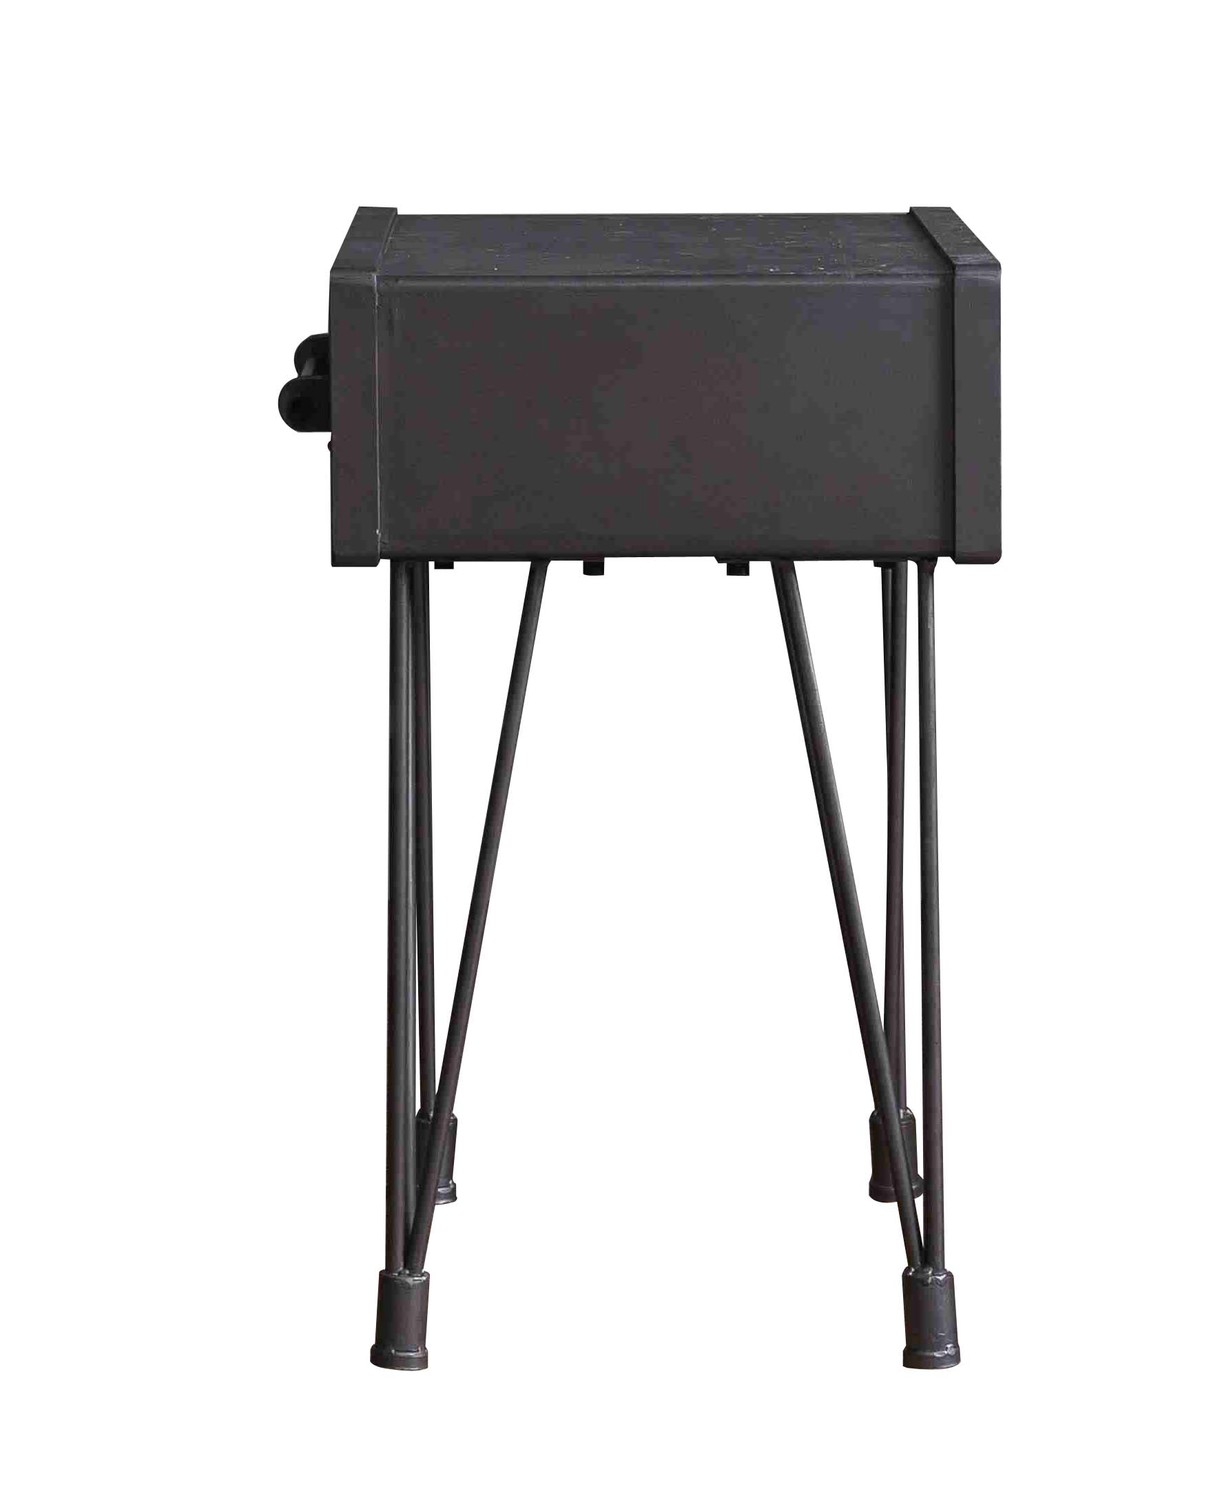 13.8" x 18.5" x 23.2" Charcoal 1 Drawer Wooden End Table